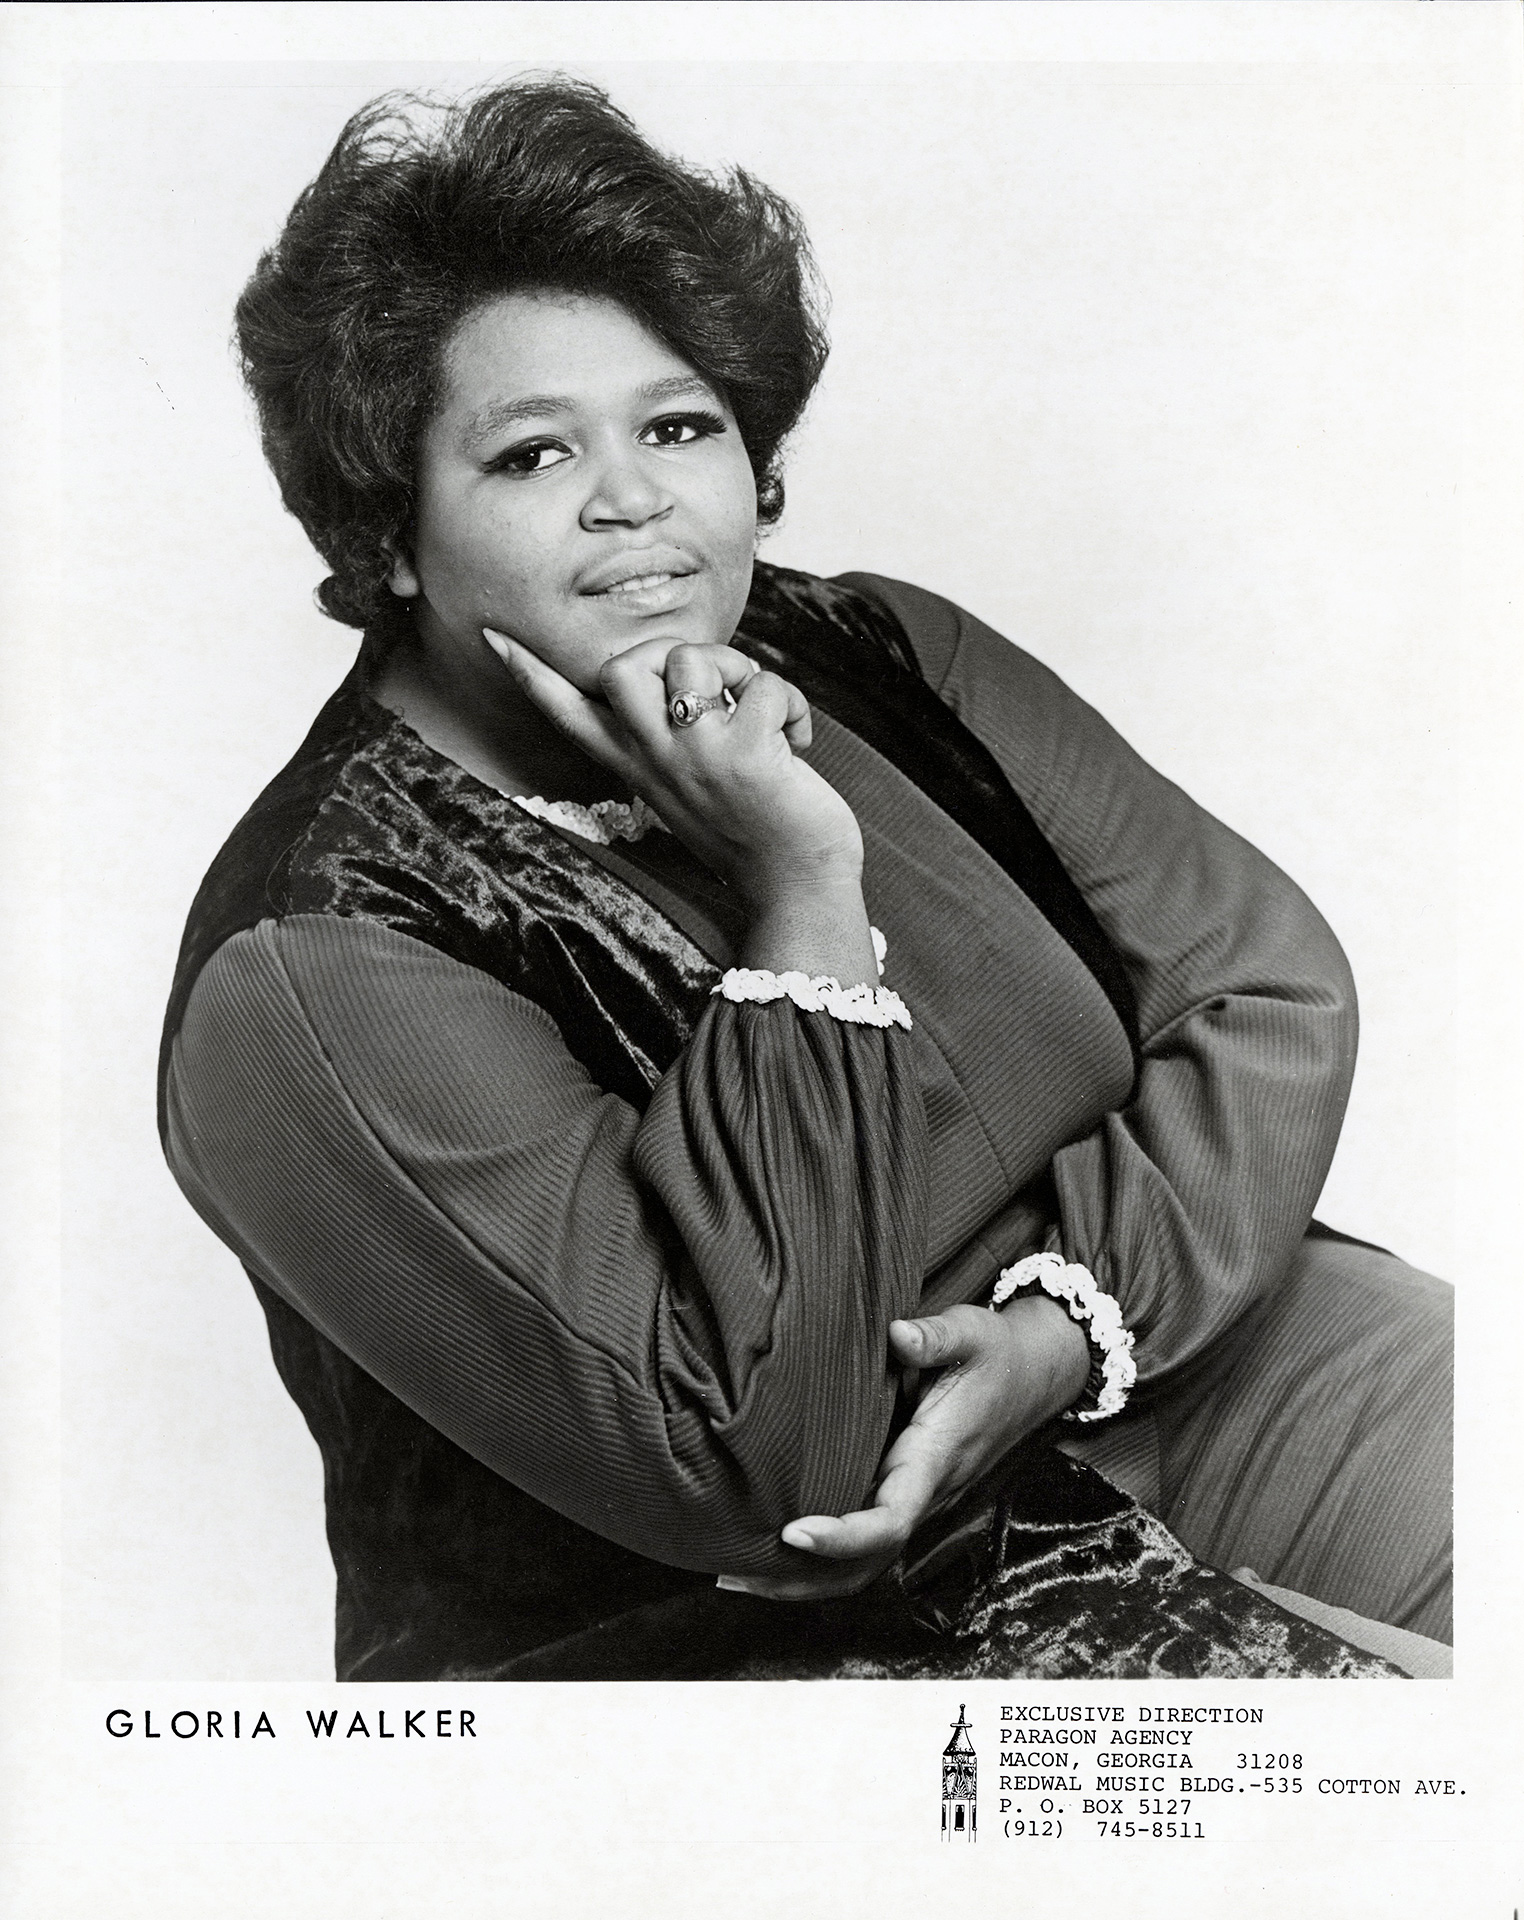 Gloria Walker in her solo days in the 1970s (photograph courtesy of Georgia College Special Collections)